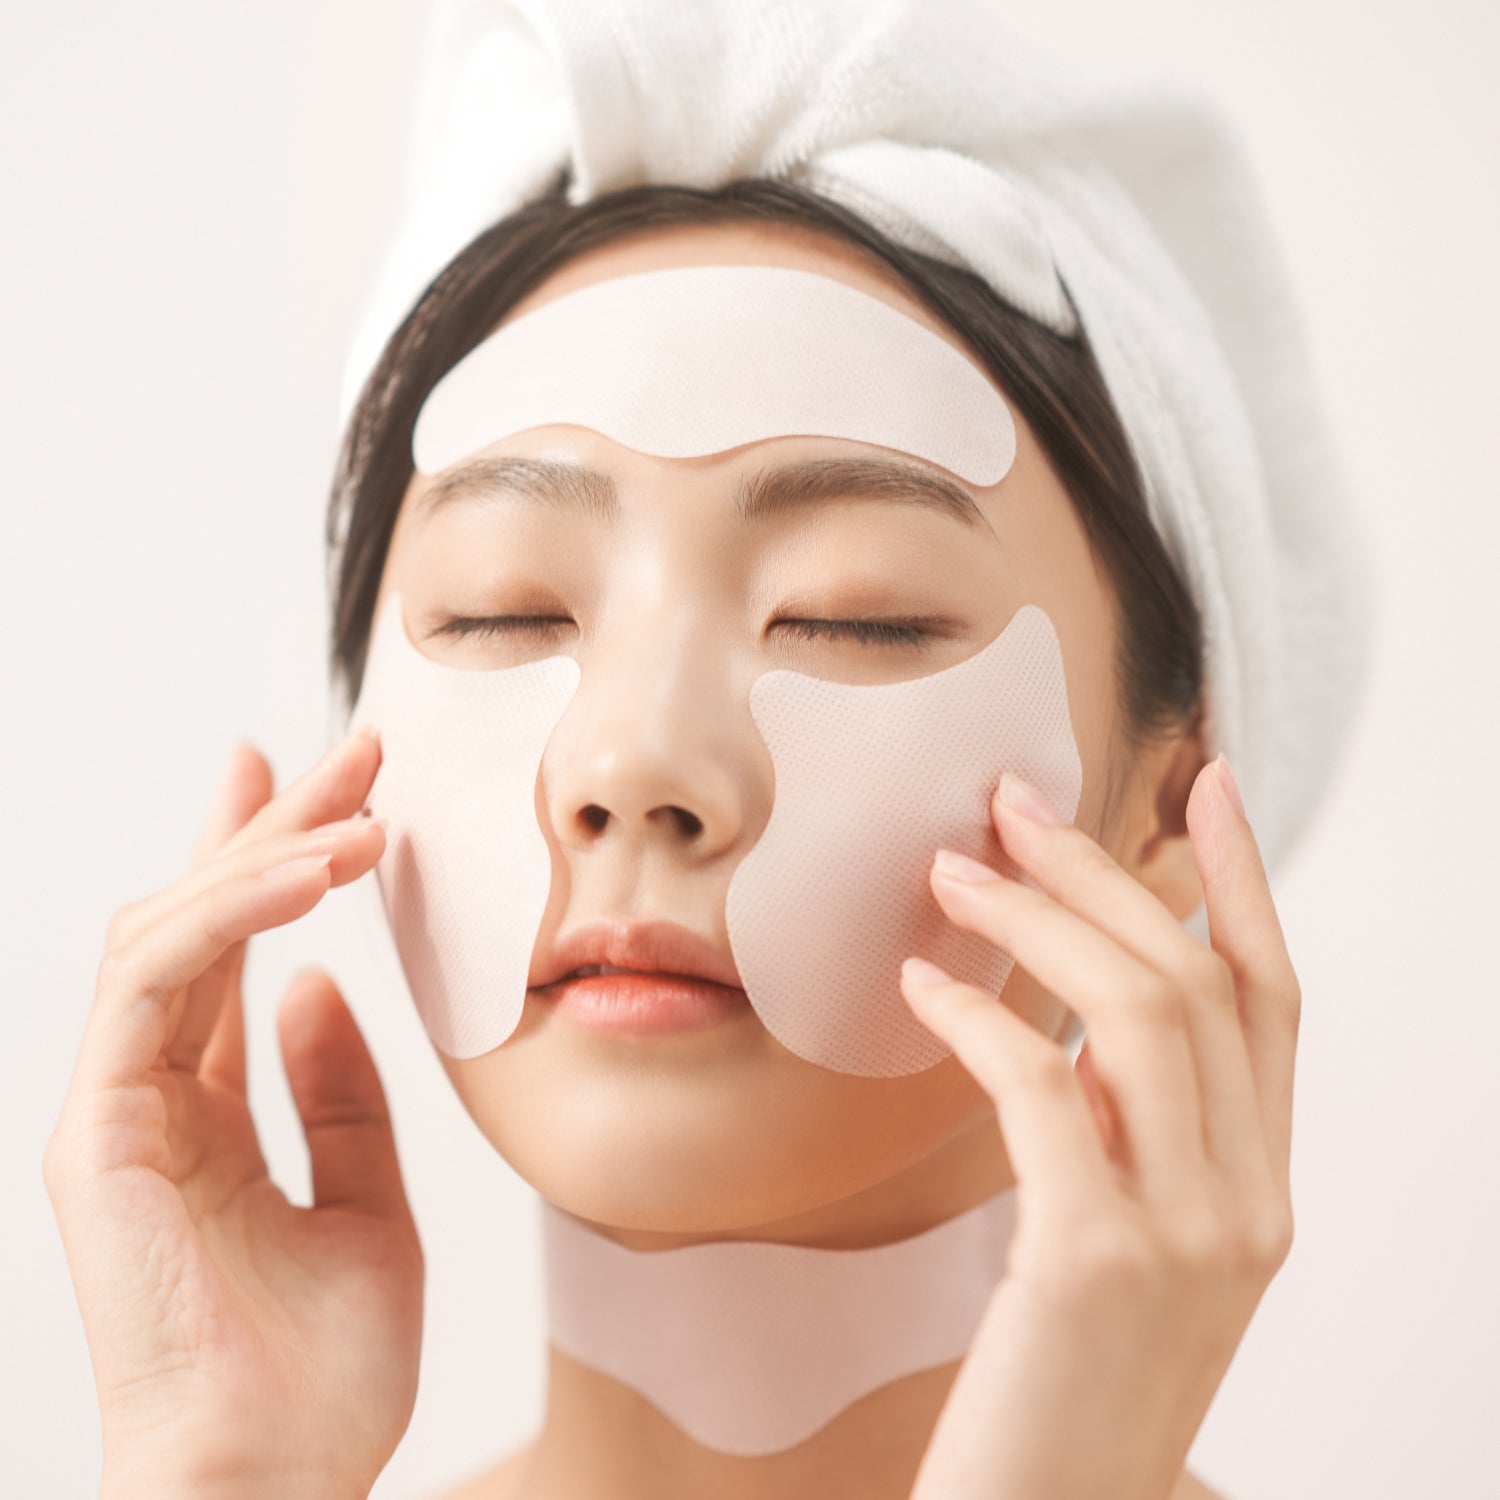 Vitalique Collagen Melting Patch for Forehead